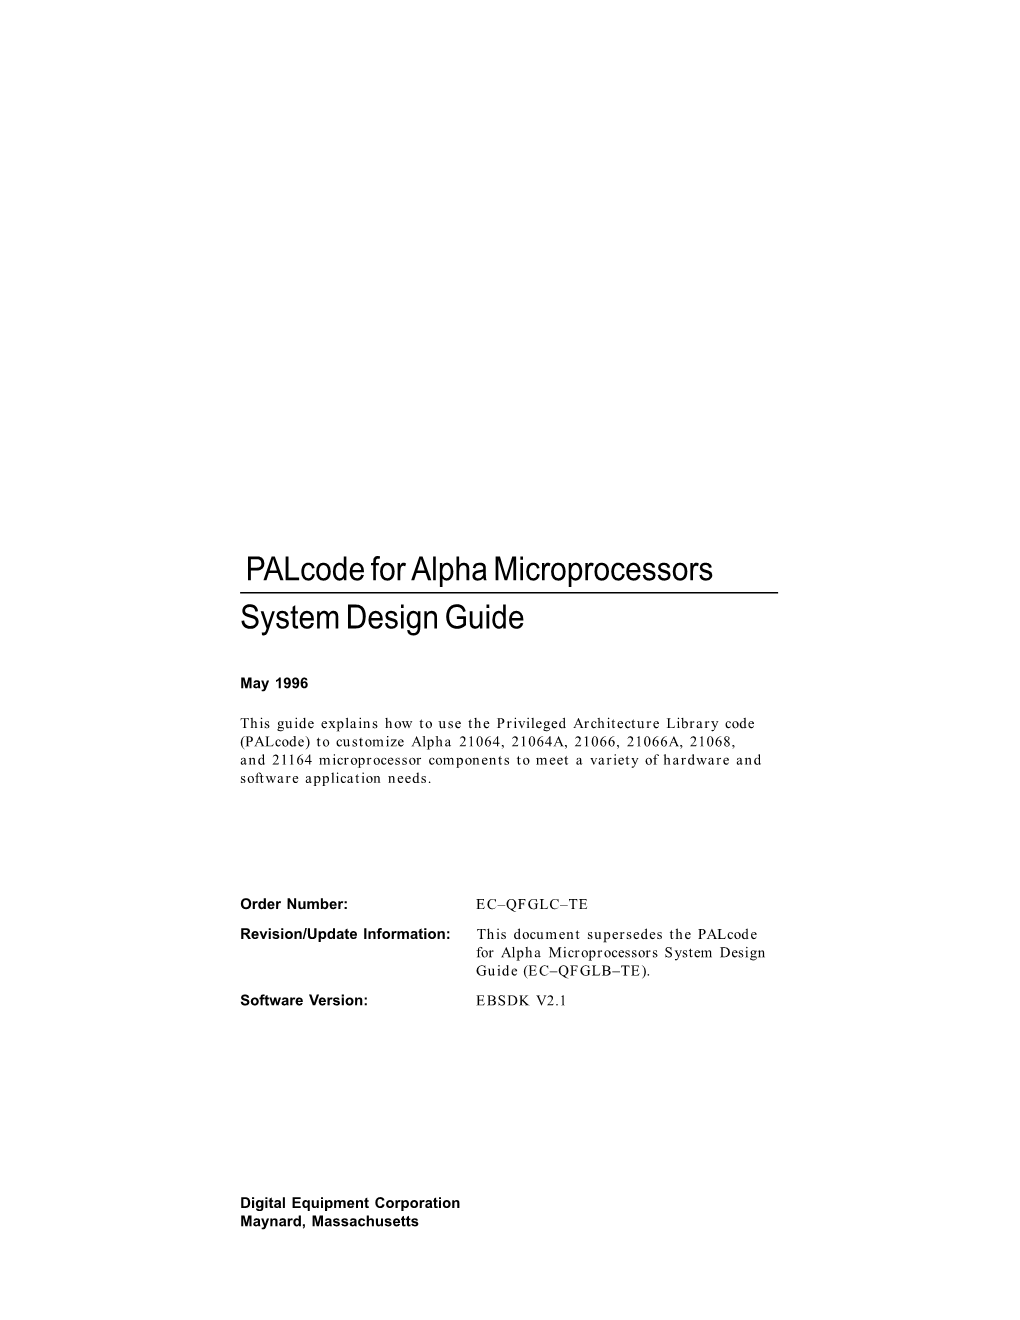 Palcode for Alpha Microprocessors System Design Guide